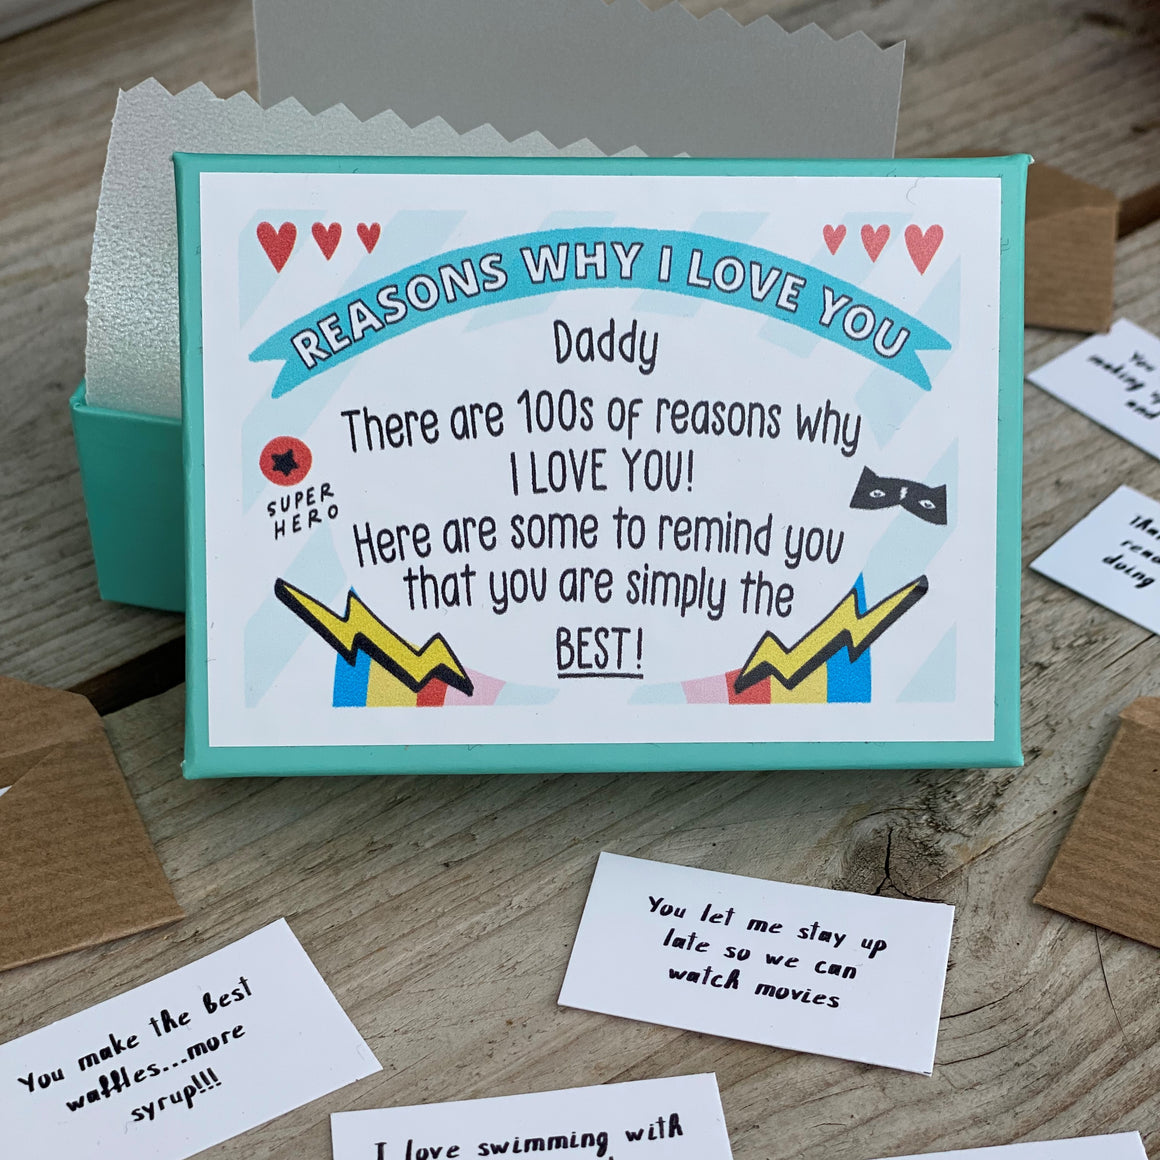 12 'Reasons Why I Love You Daddy' Mini Letters